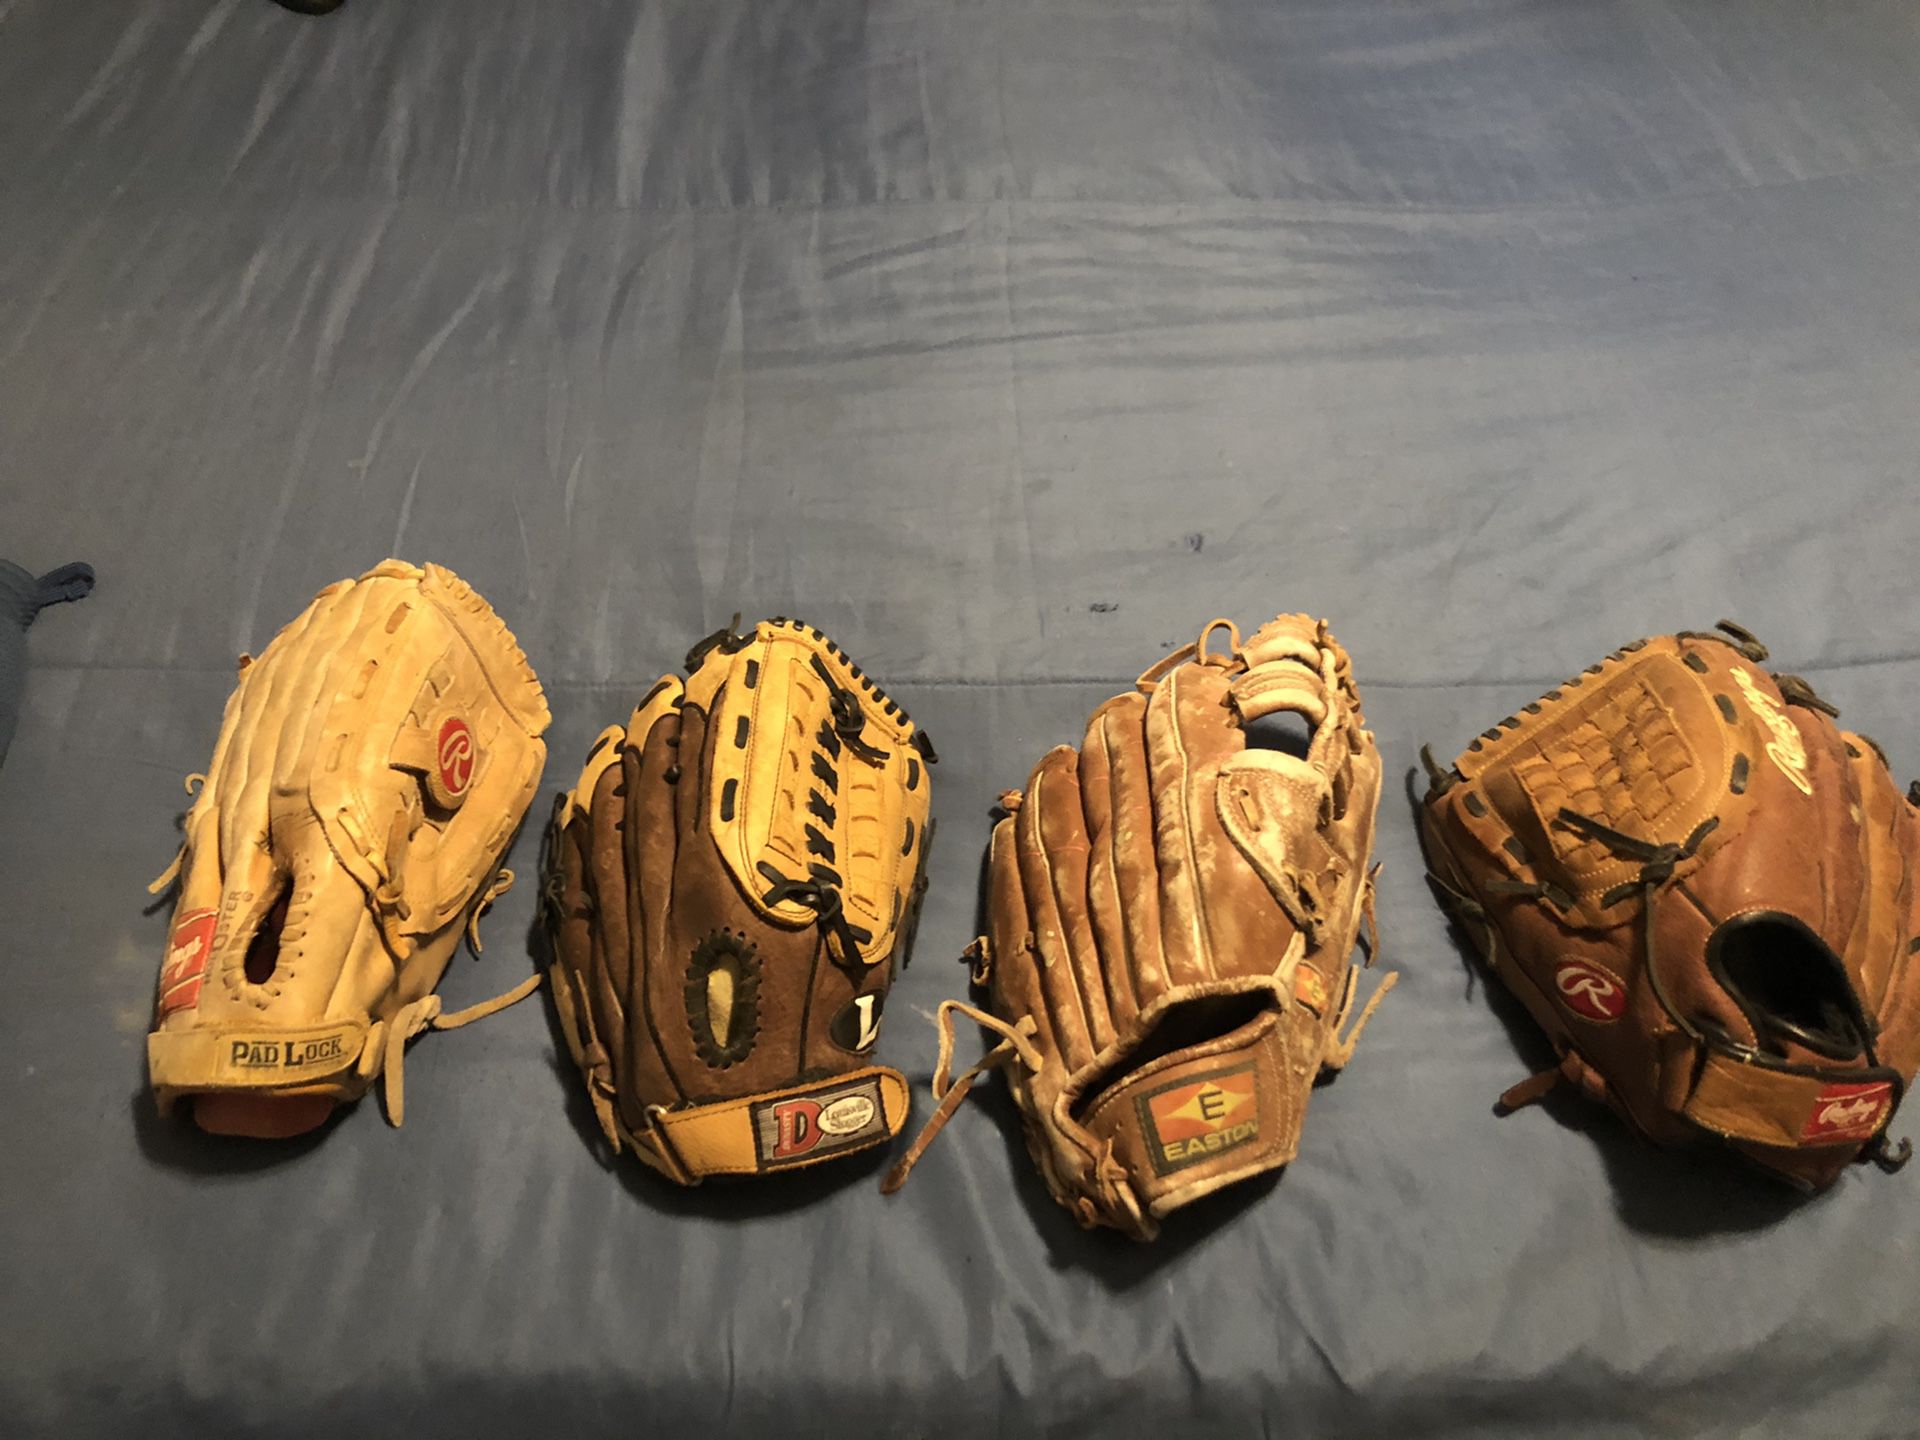 4 baseball glover used but in great condition $15 each or all 4 for $40